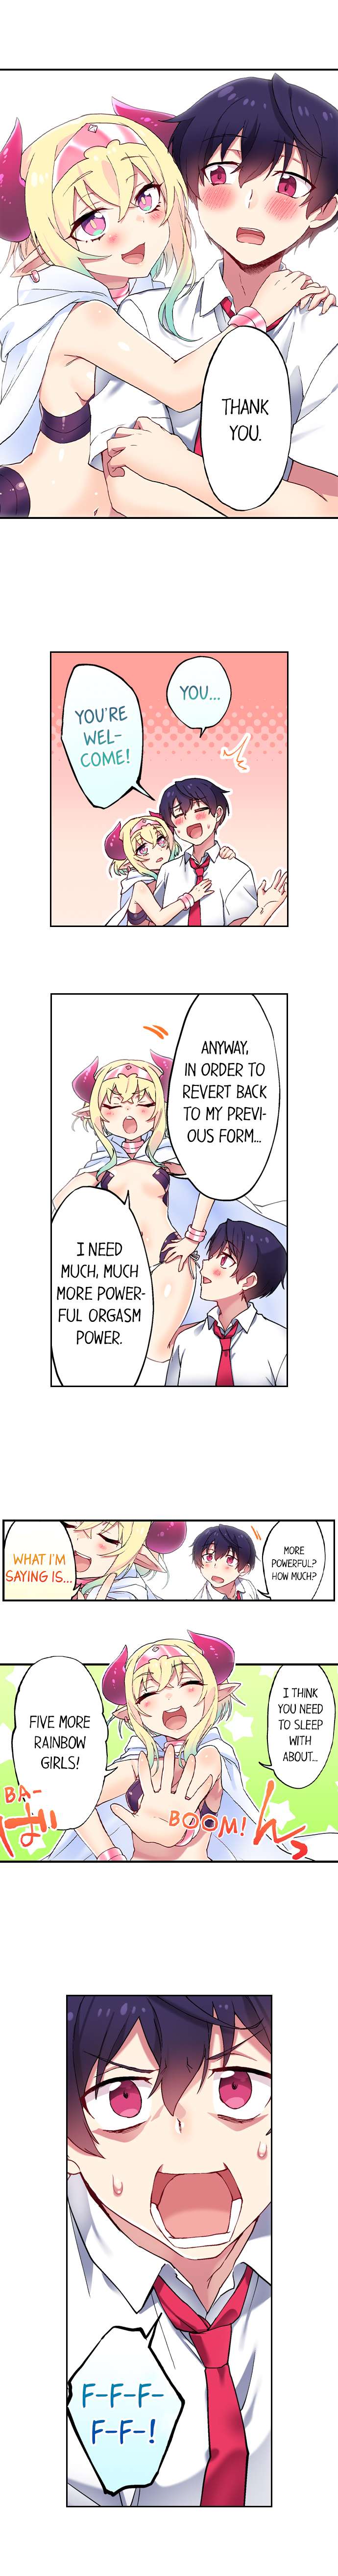 Committee Chairman, Didn’t You Just Masturbate In the Bathroom? I Can See the Number of Times People Orgasm - Chapter 100 Page 4